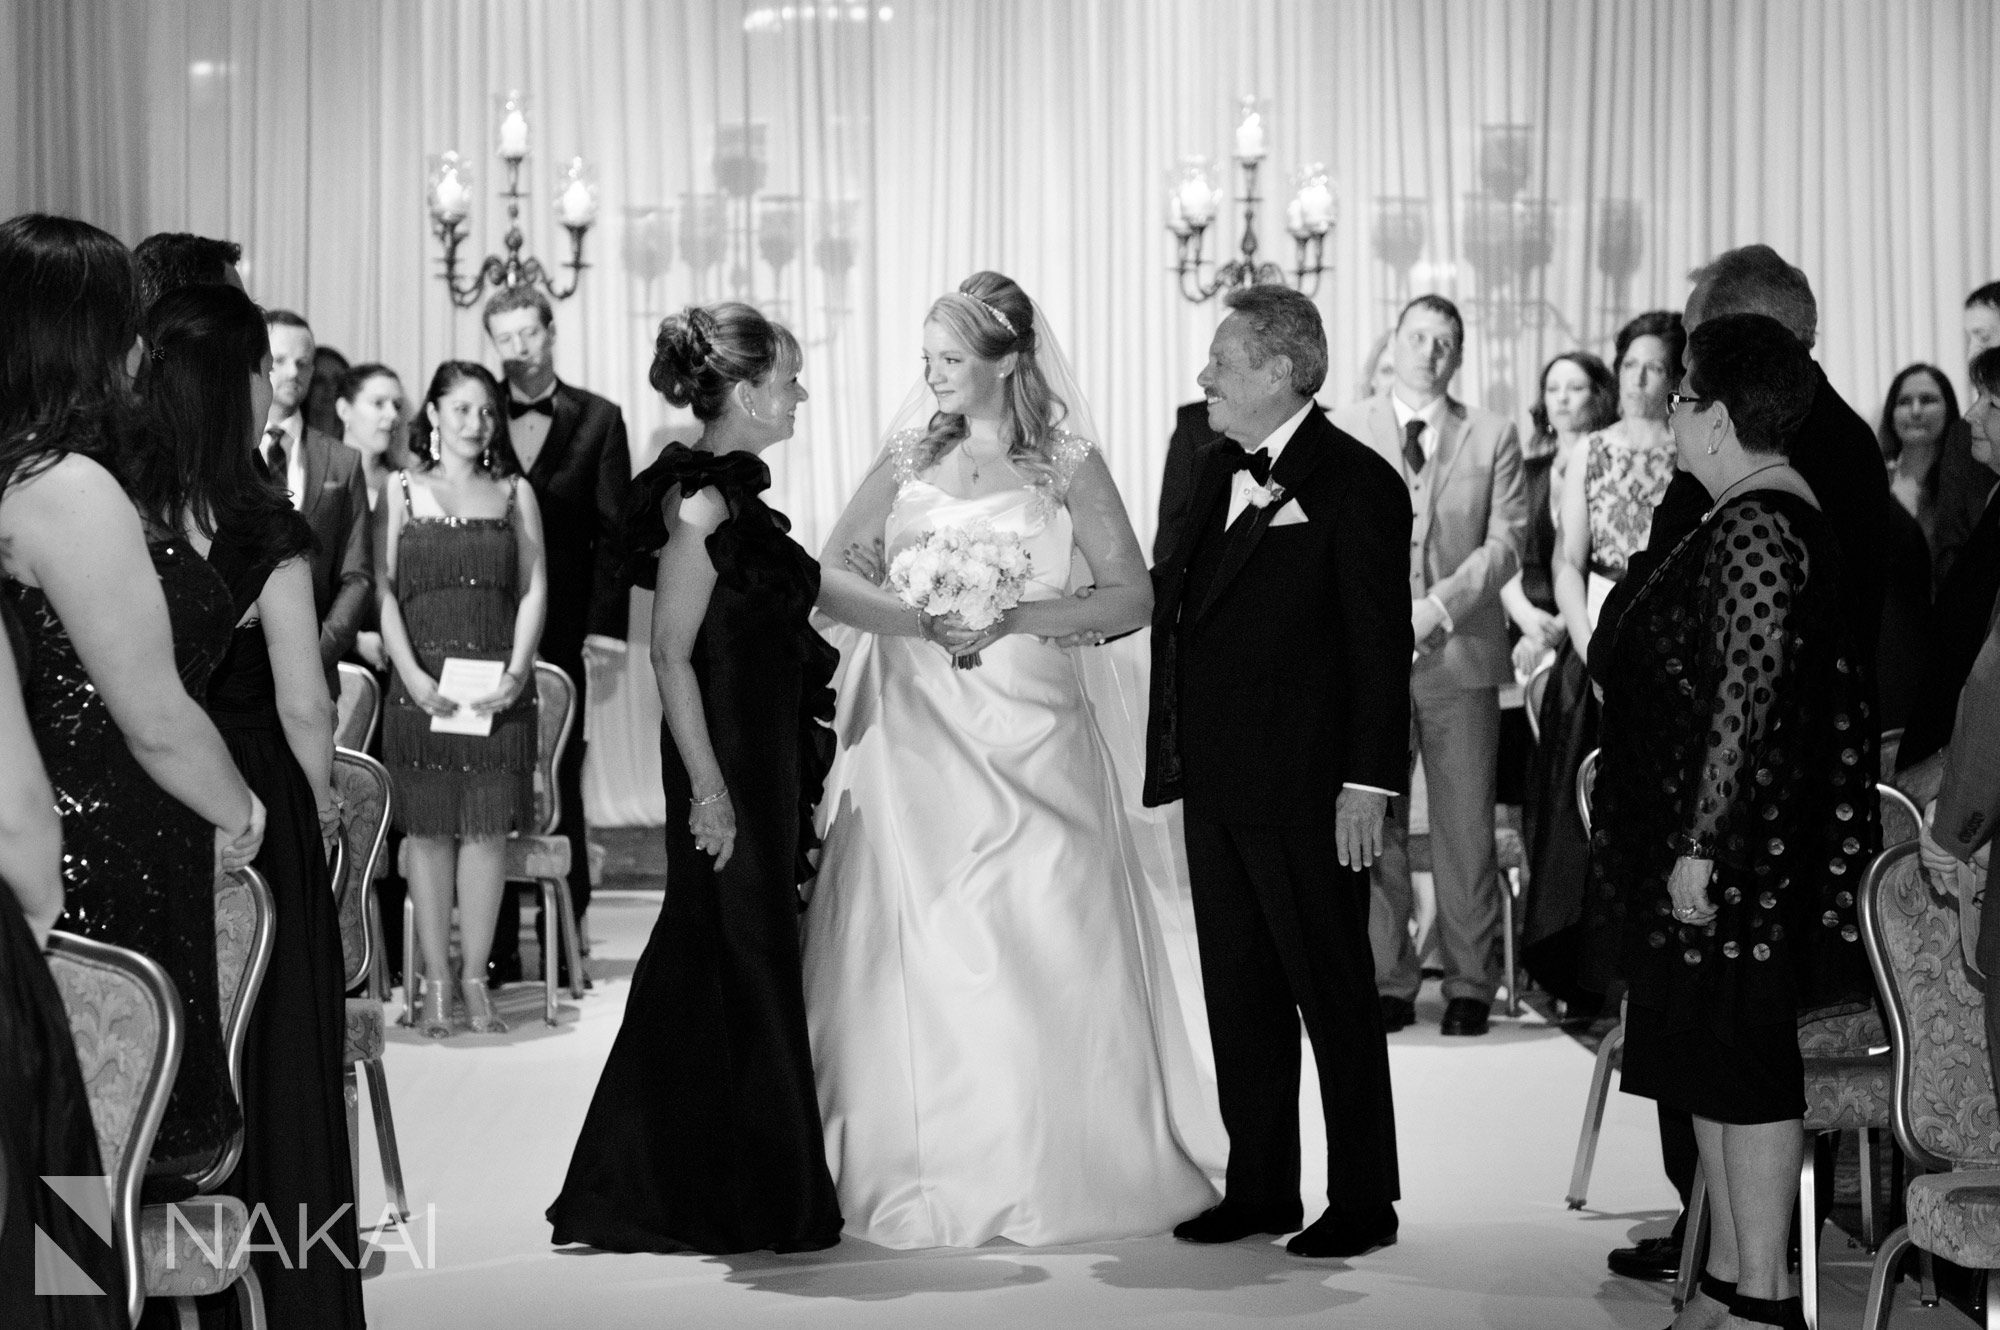 Intercontinental Chicago wedding picture ceremony magnificent mile